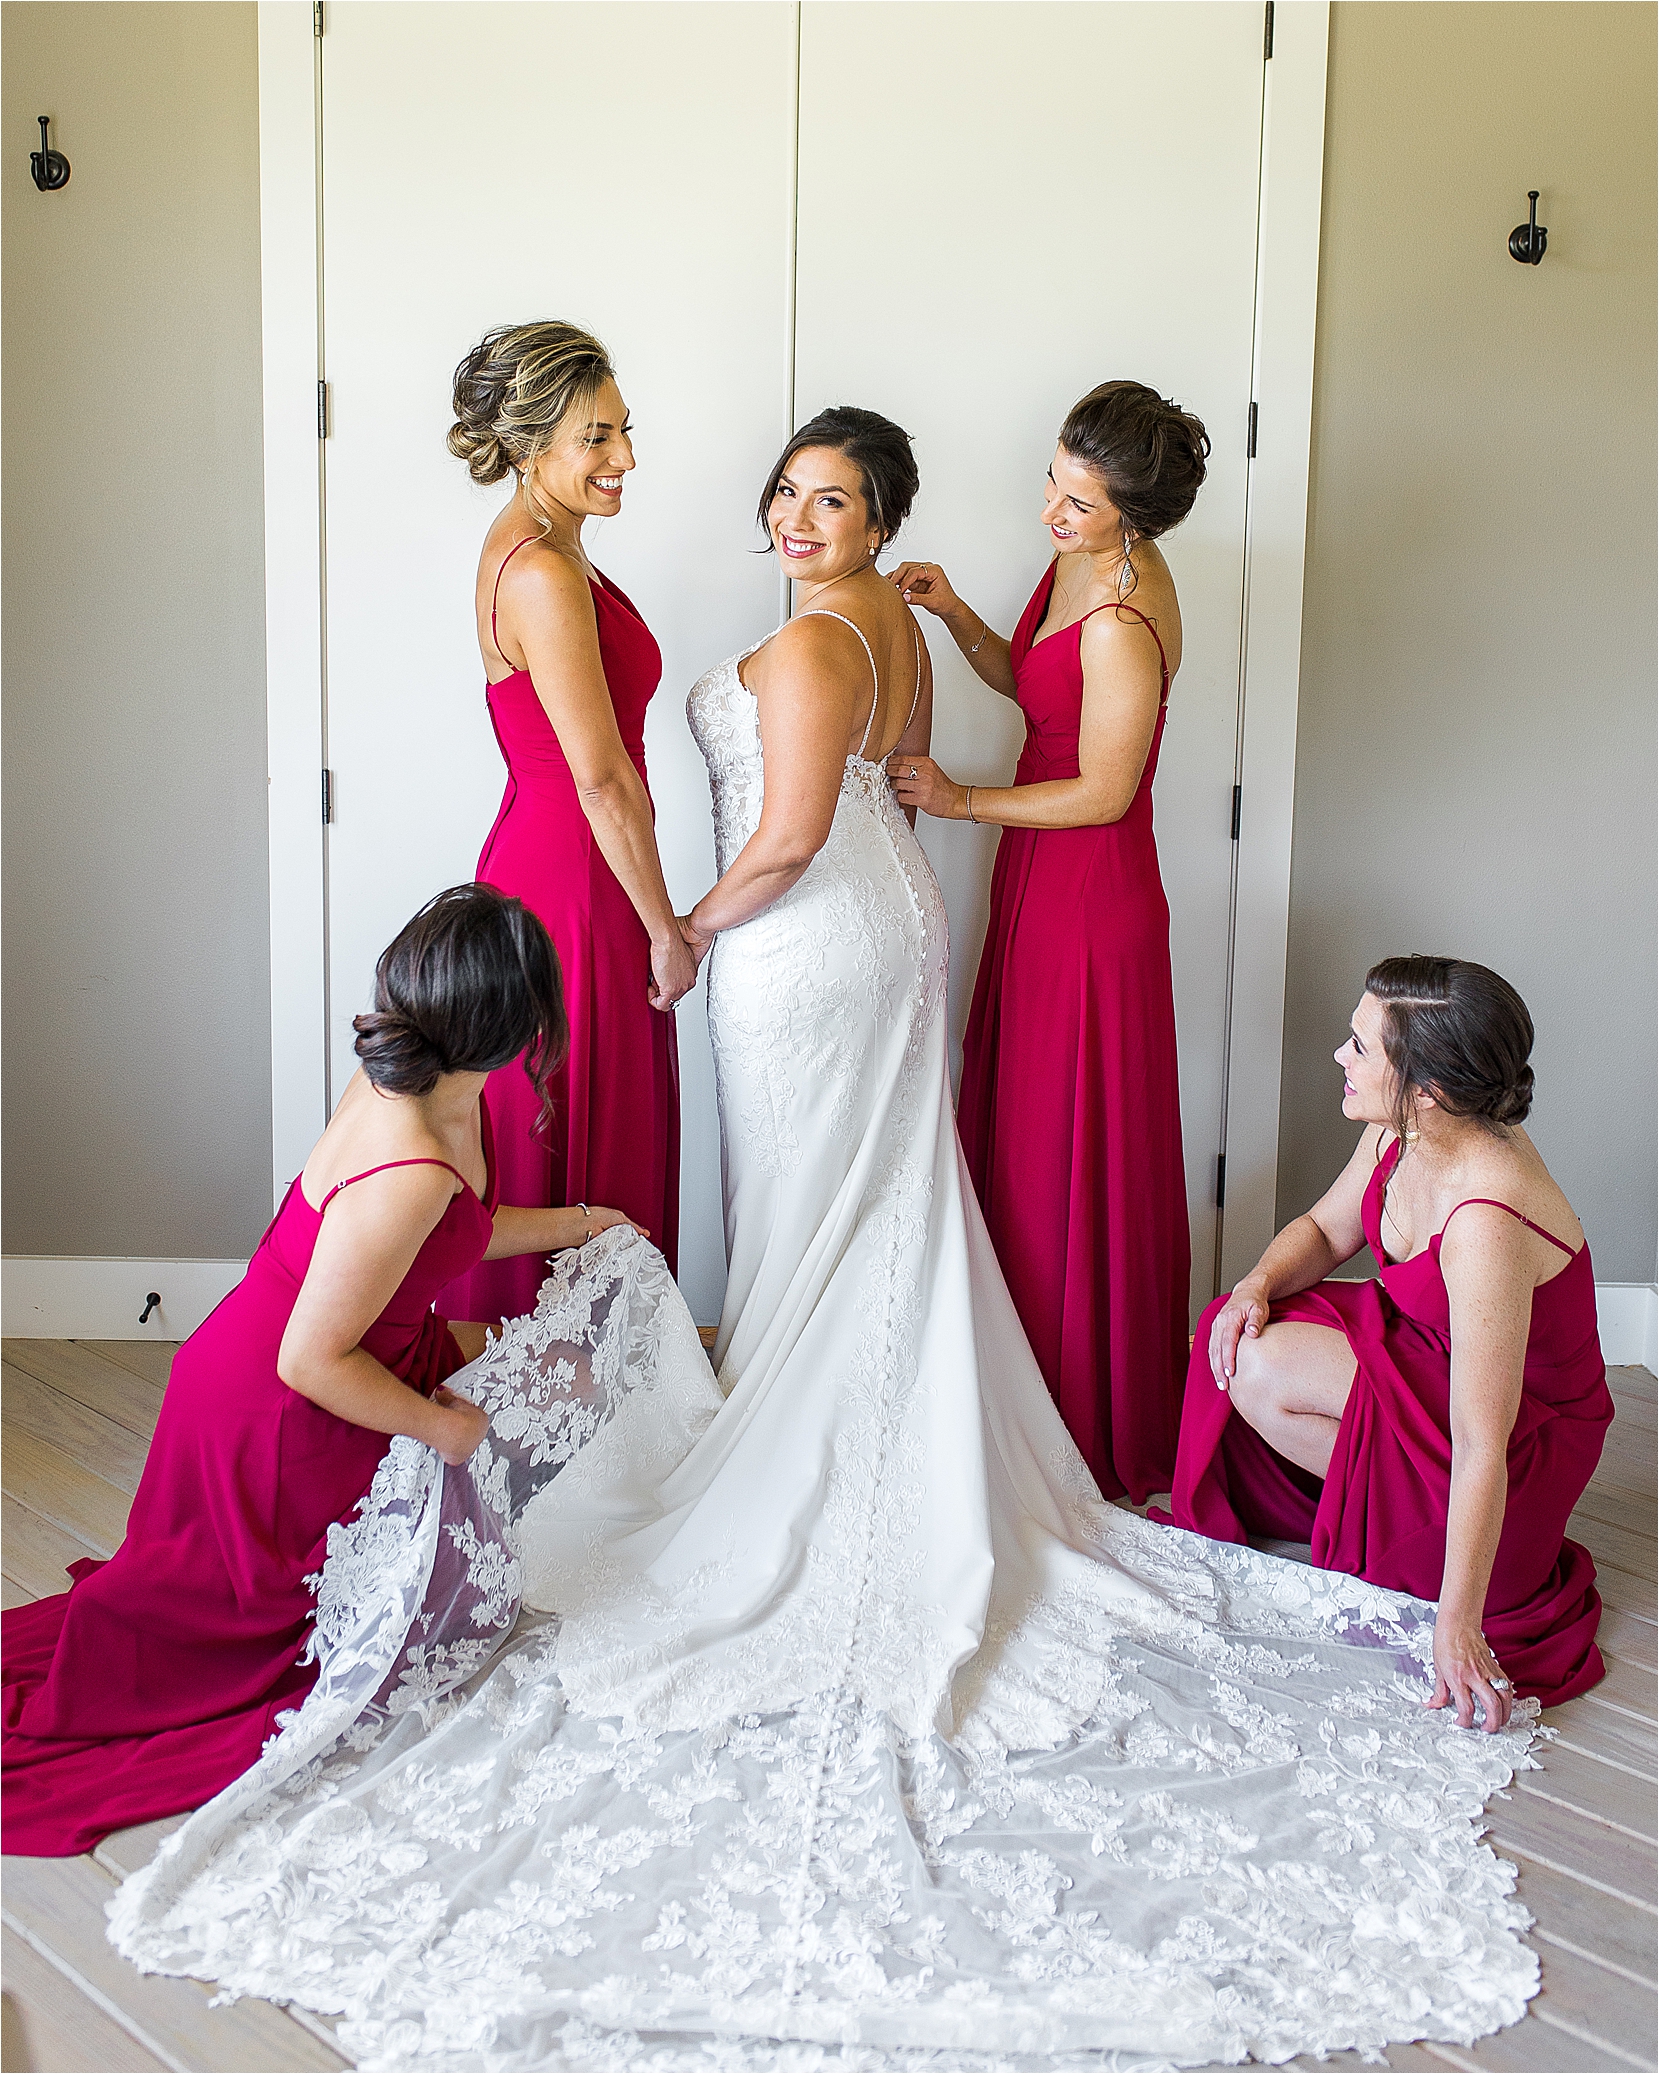 A bride peeks back over her shoulder as her bridesmaids help her get married at Paniolo Ranch in Boerne, Texas